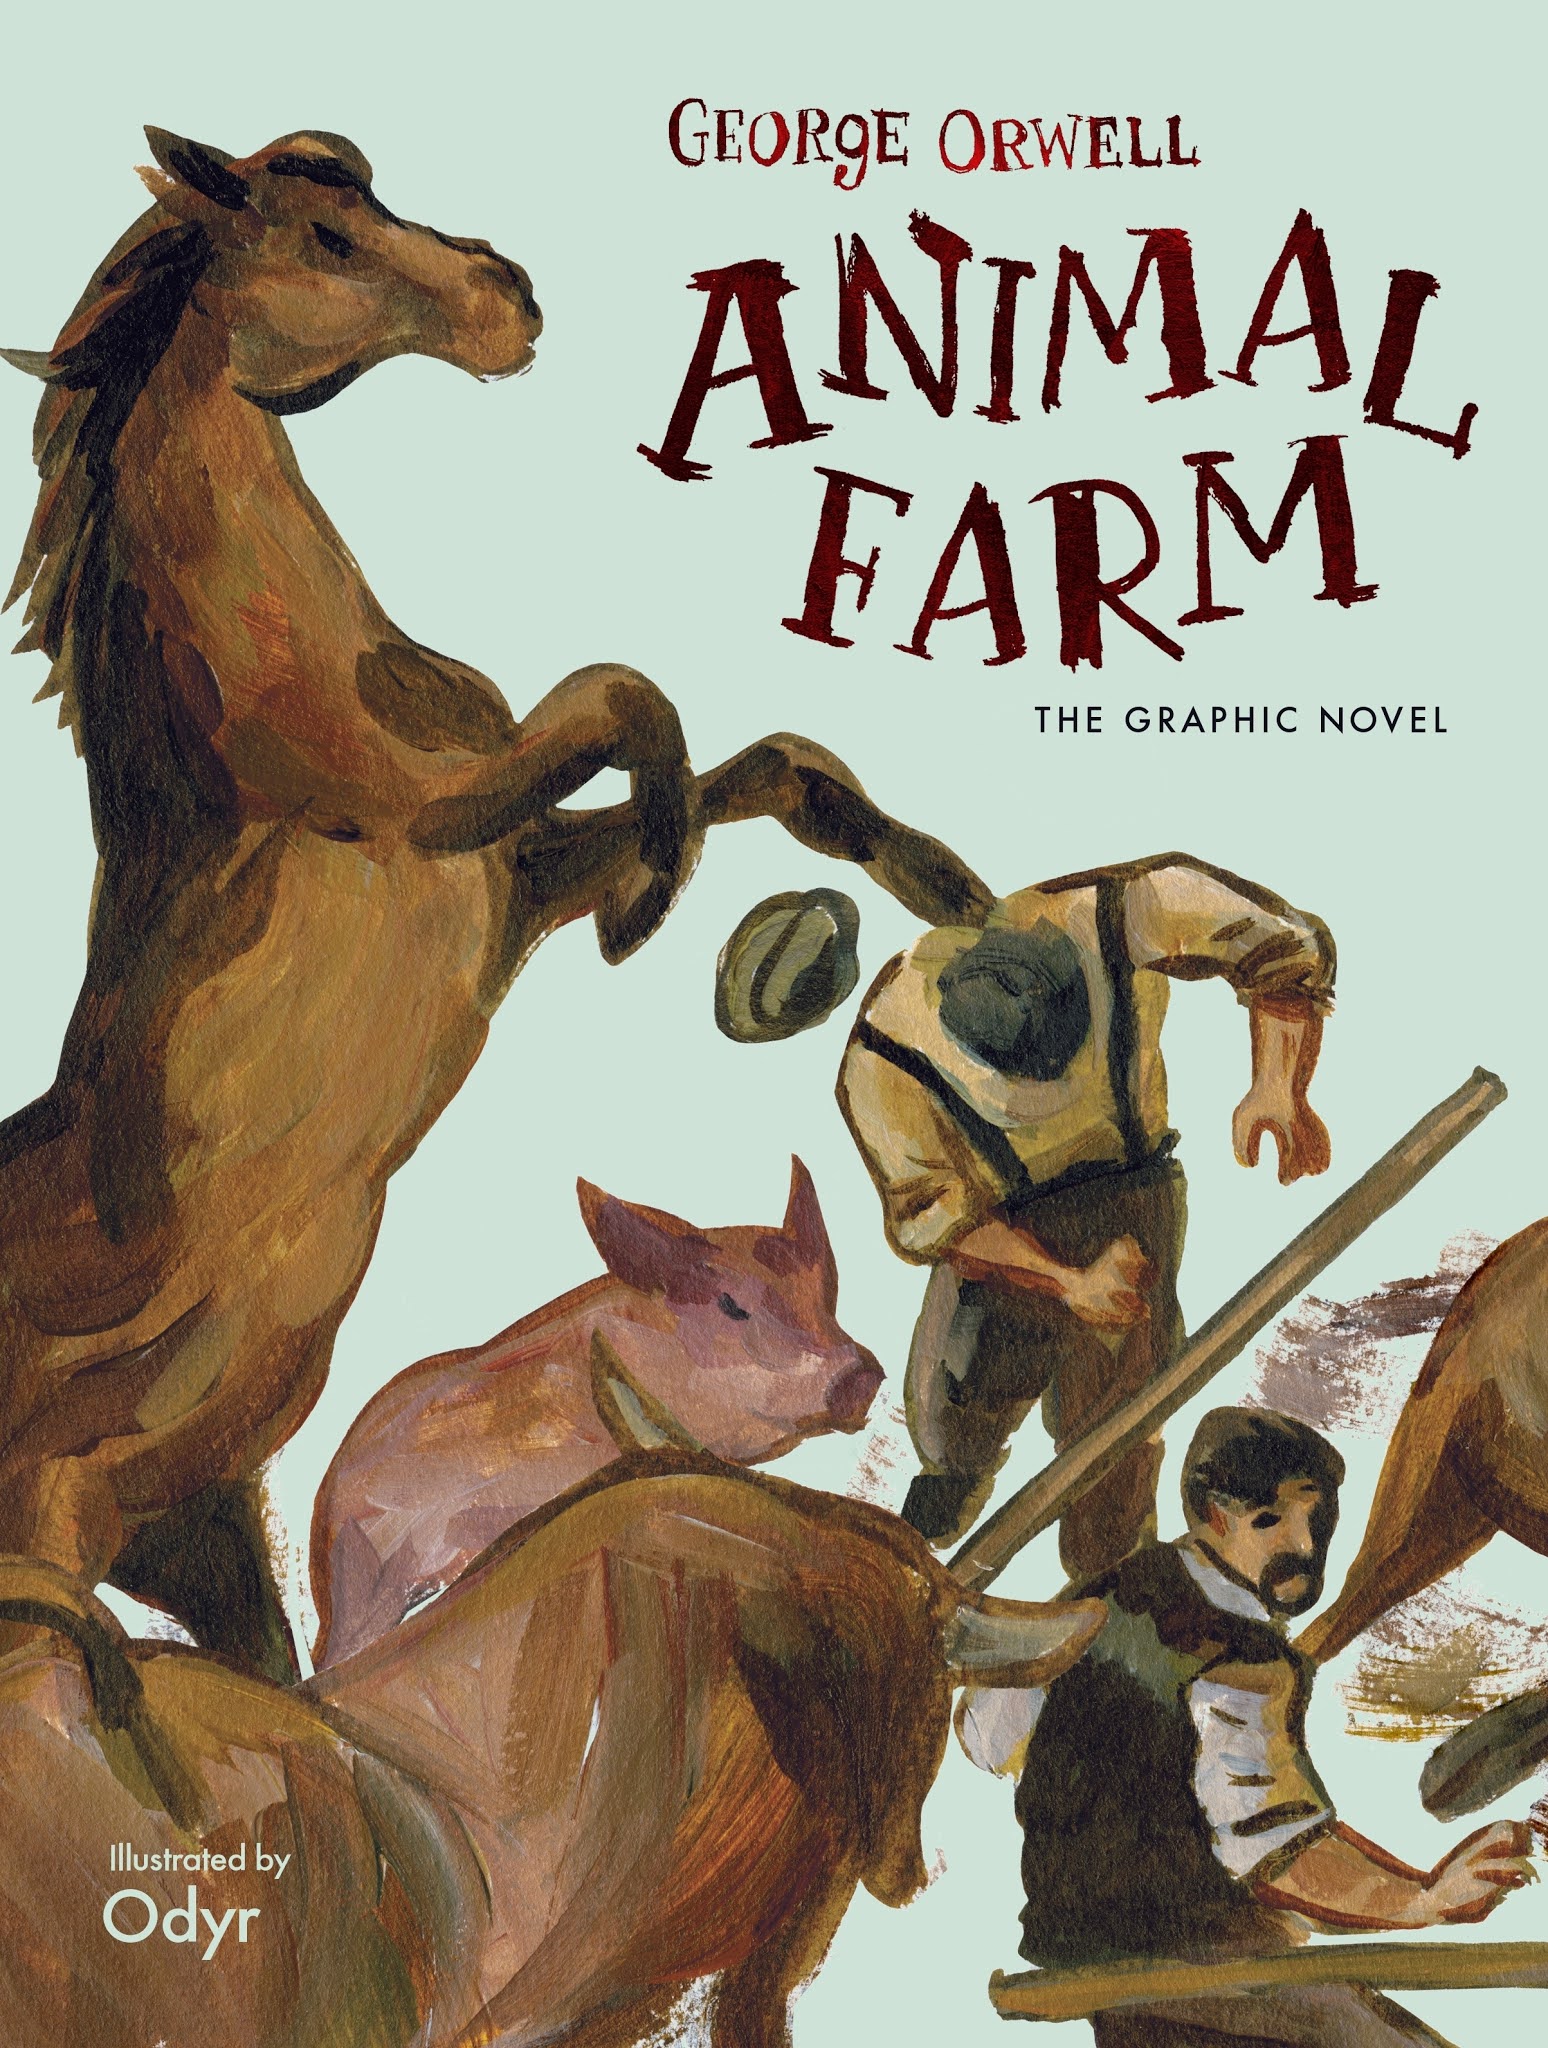 book review of the animal farm